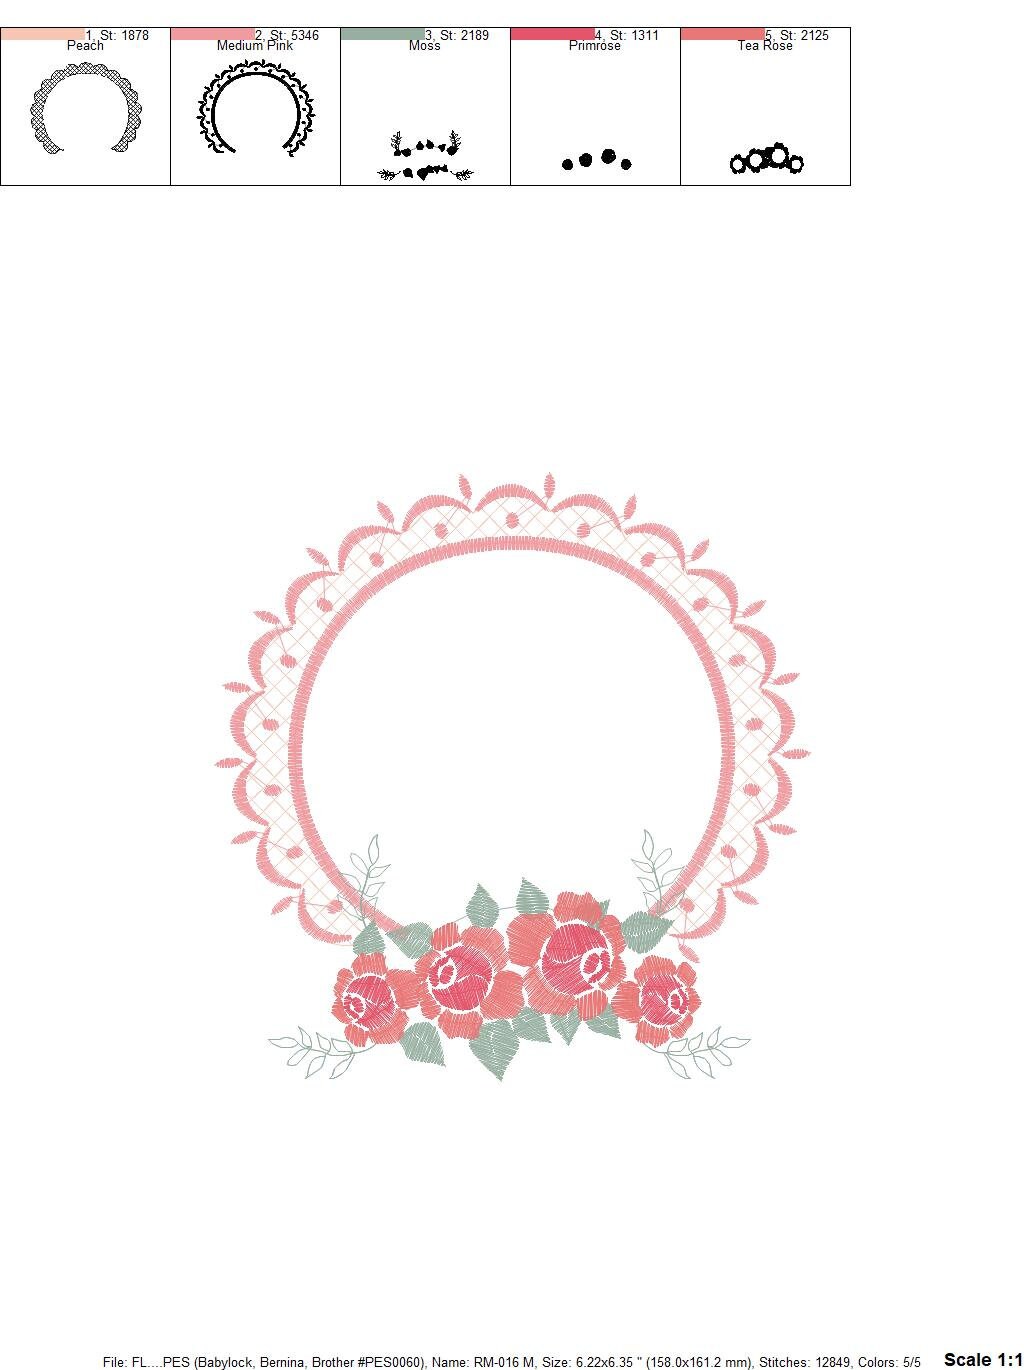 Monogram frame with roses Machine Embroidery Design - 4 sizes